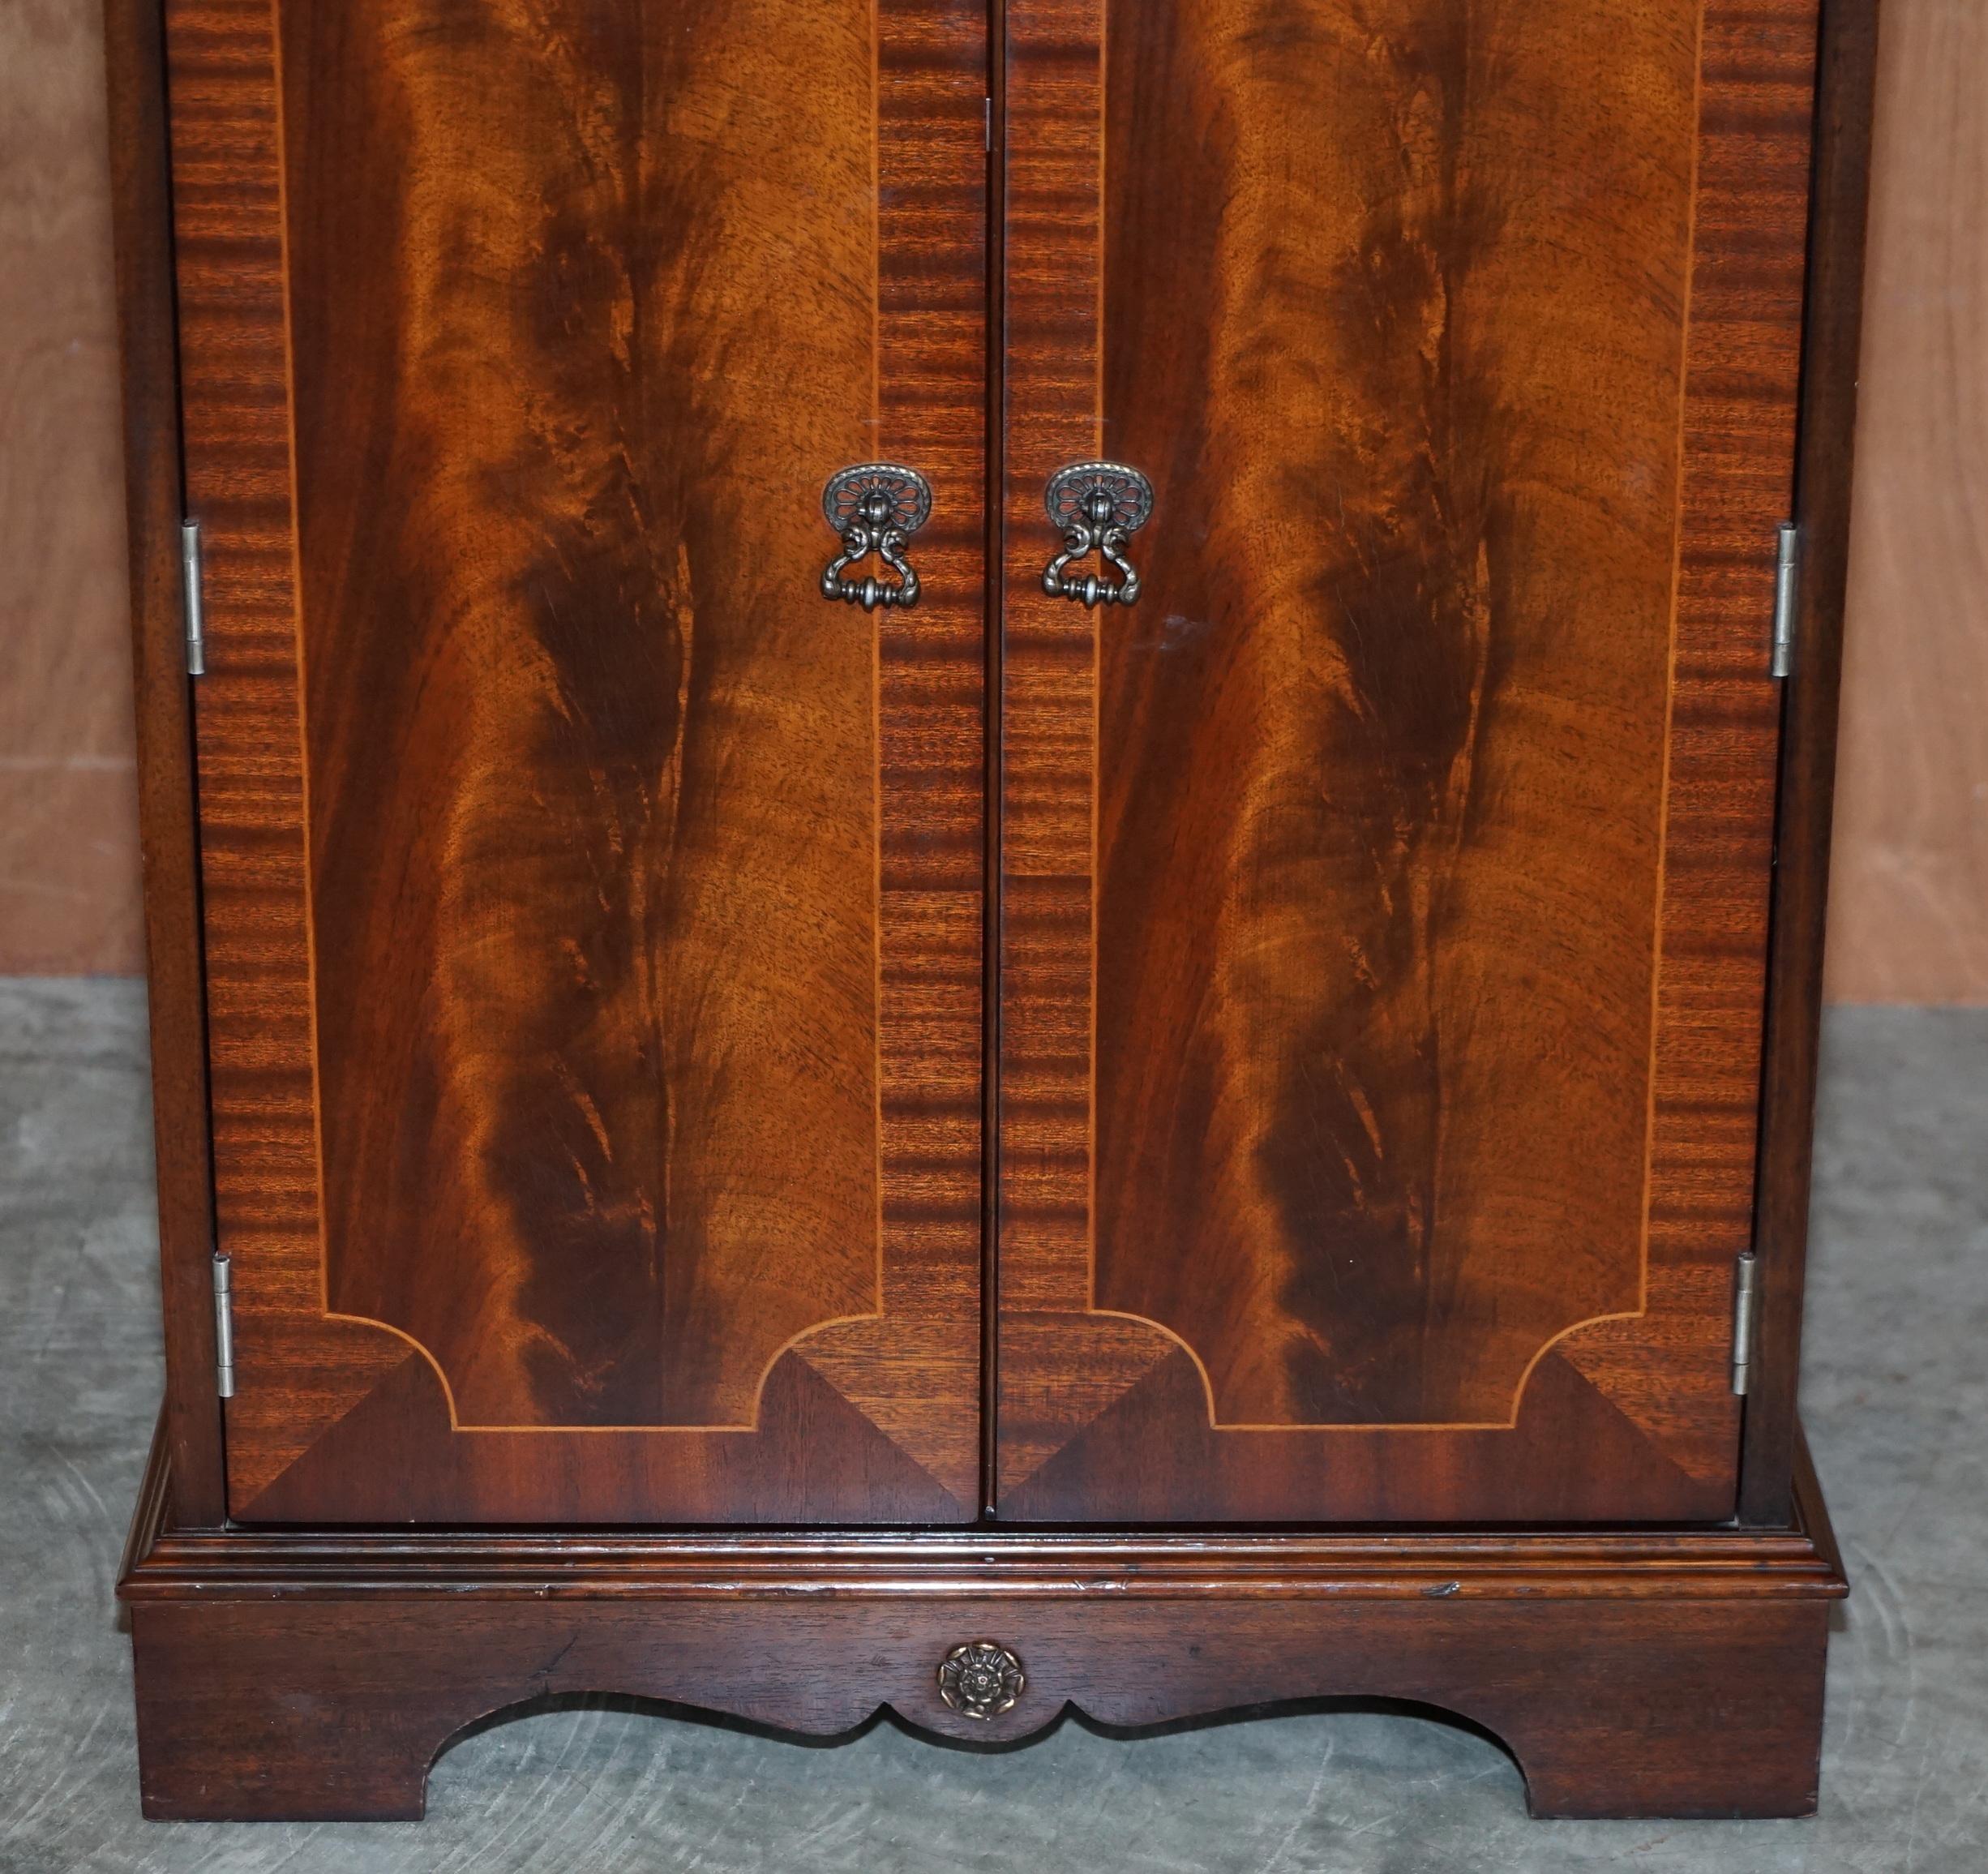 English Harlow Productions Ltd Vintage Flamed Hardwood Record Player Cabinet Cupboard